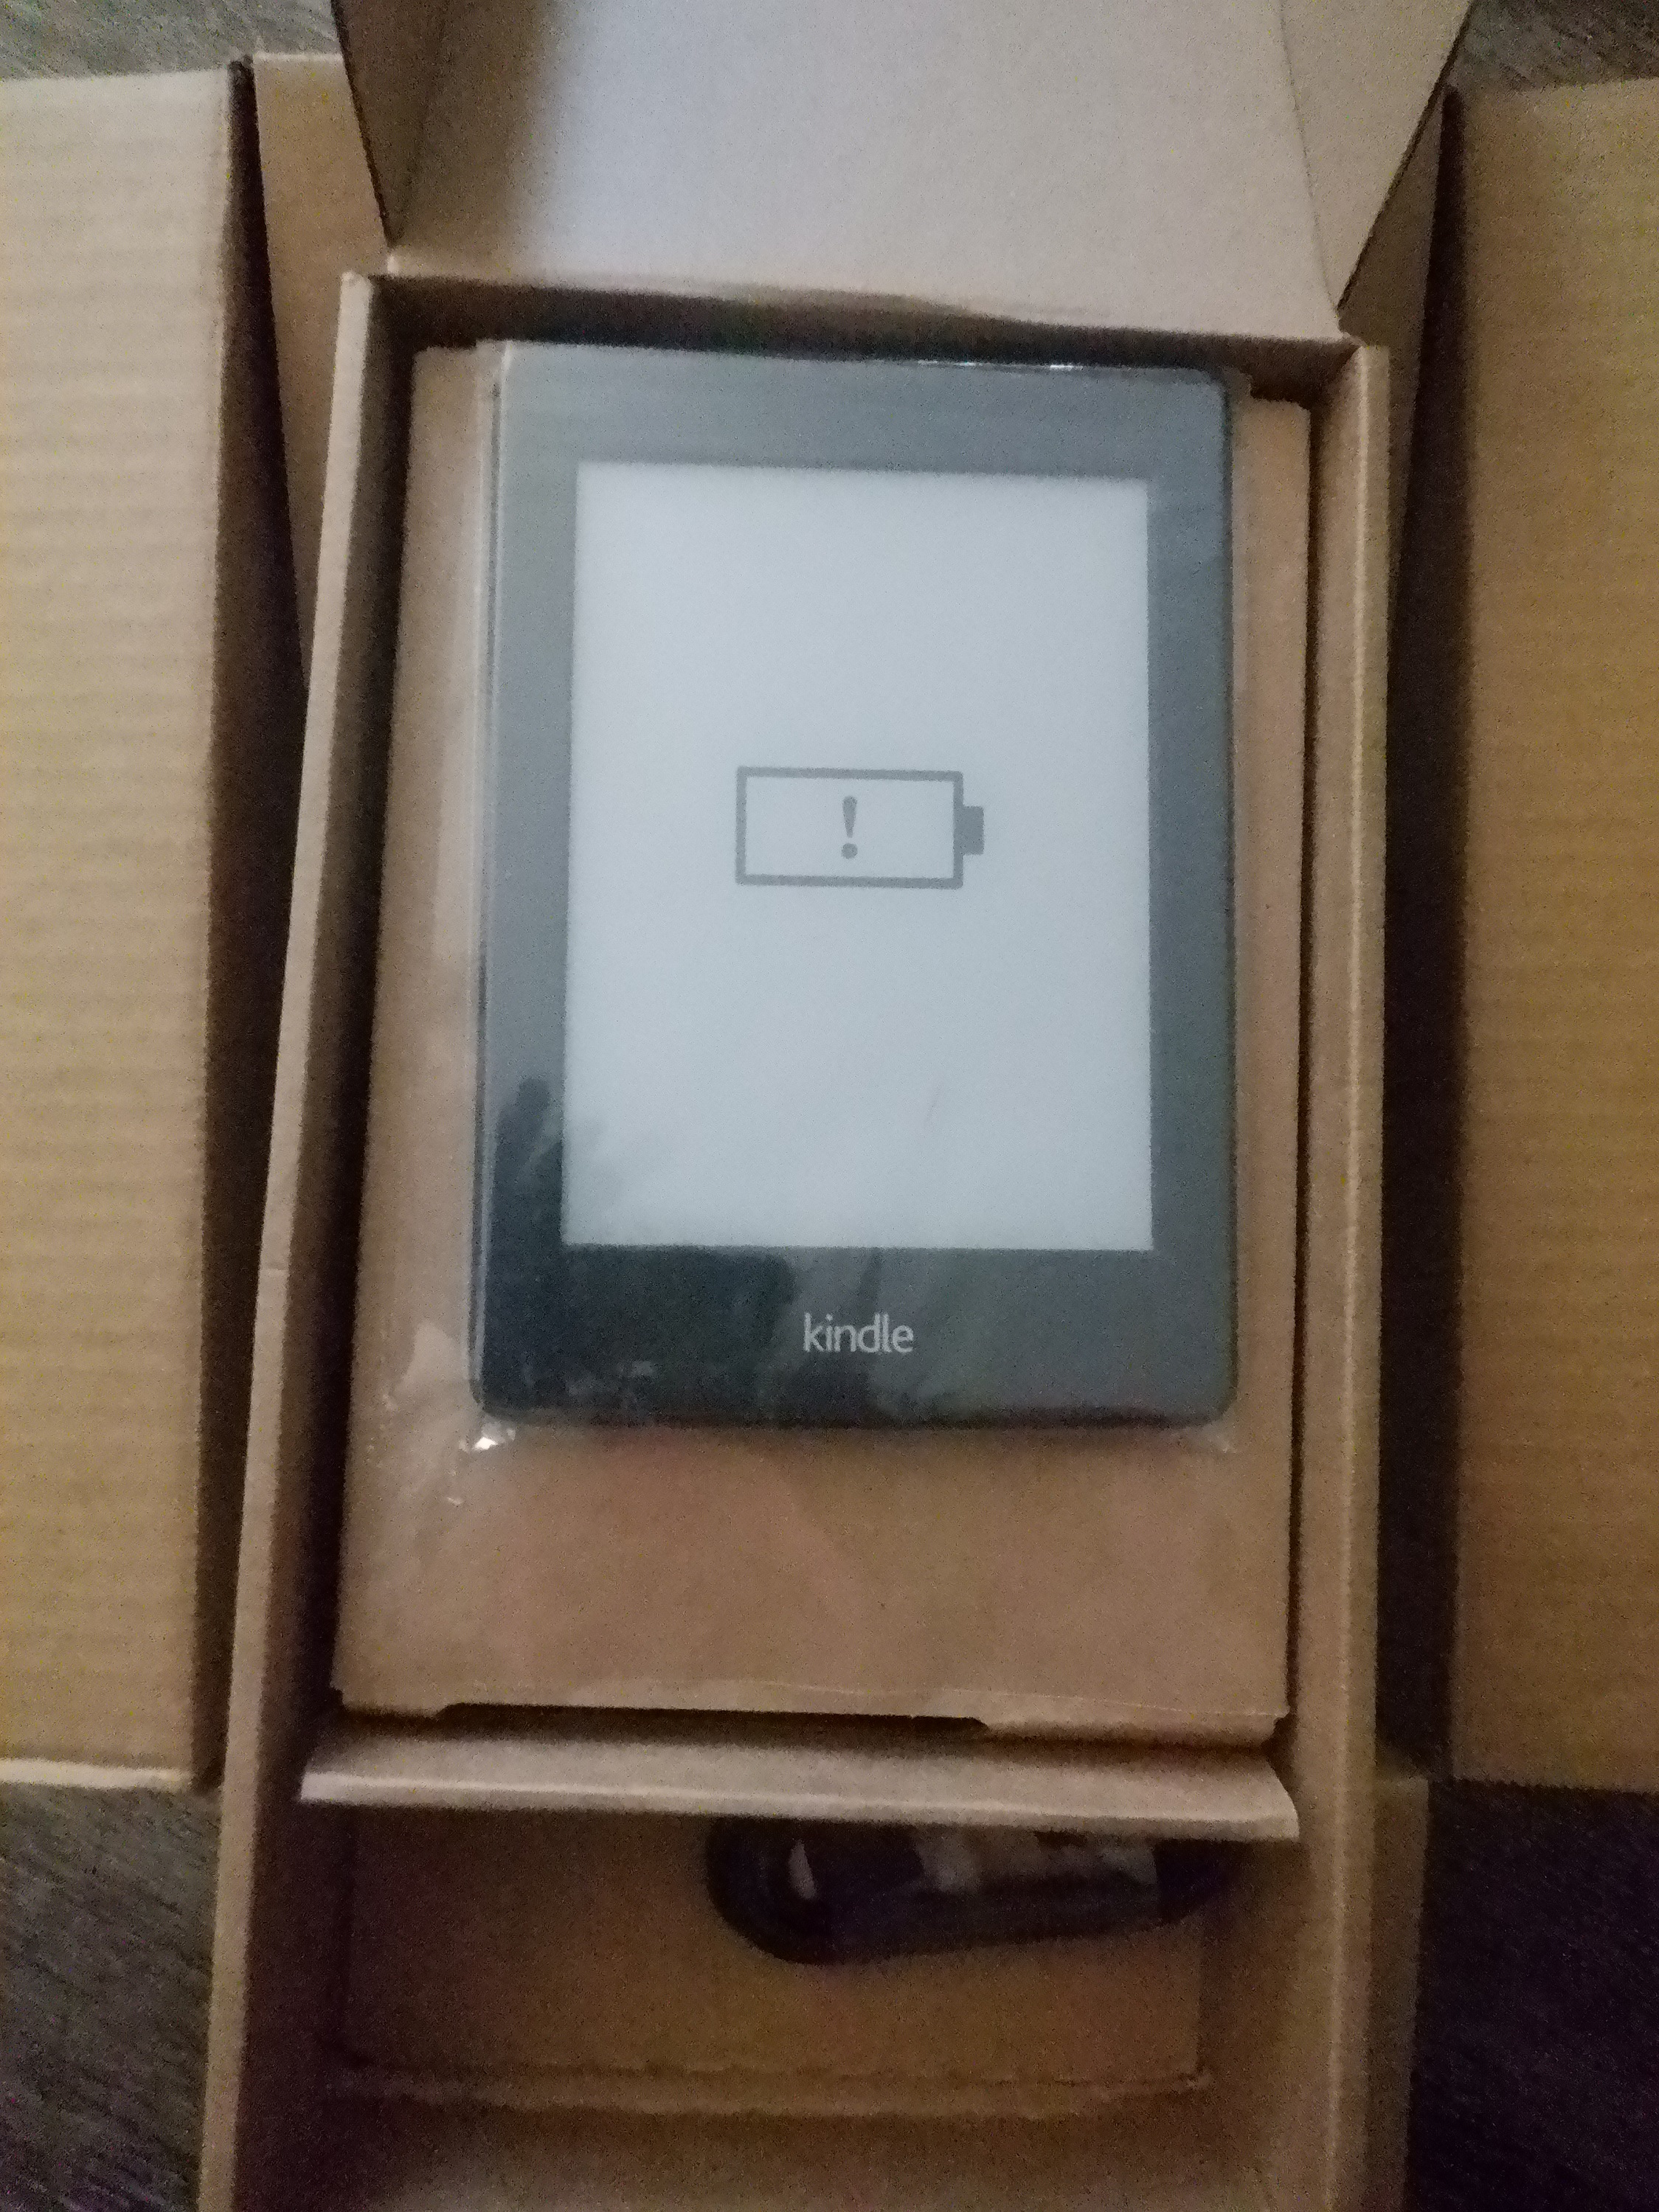 Photo I took of the open box with the Kindle in it